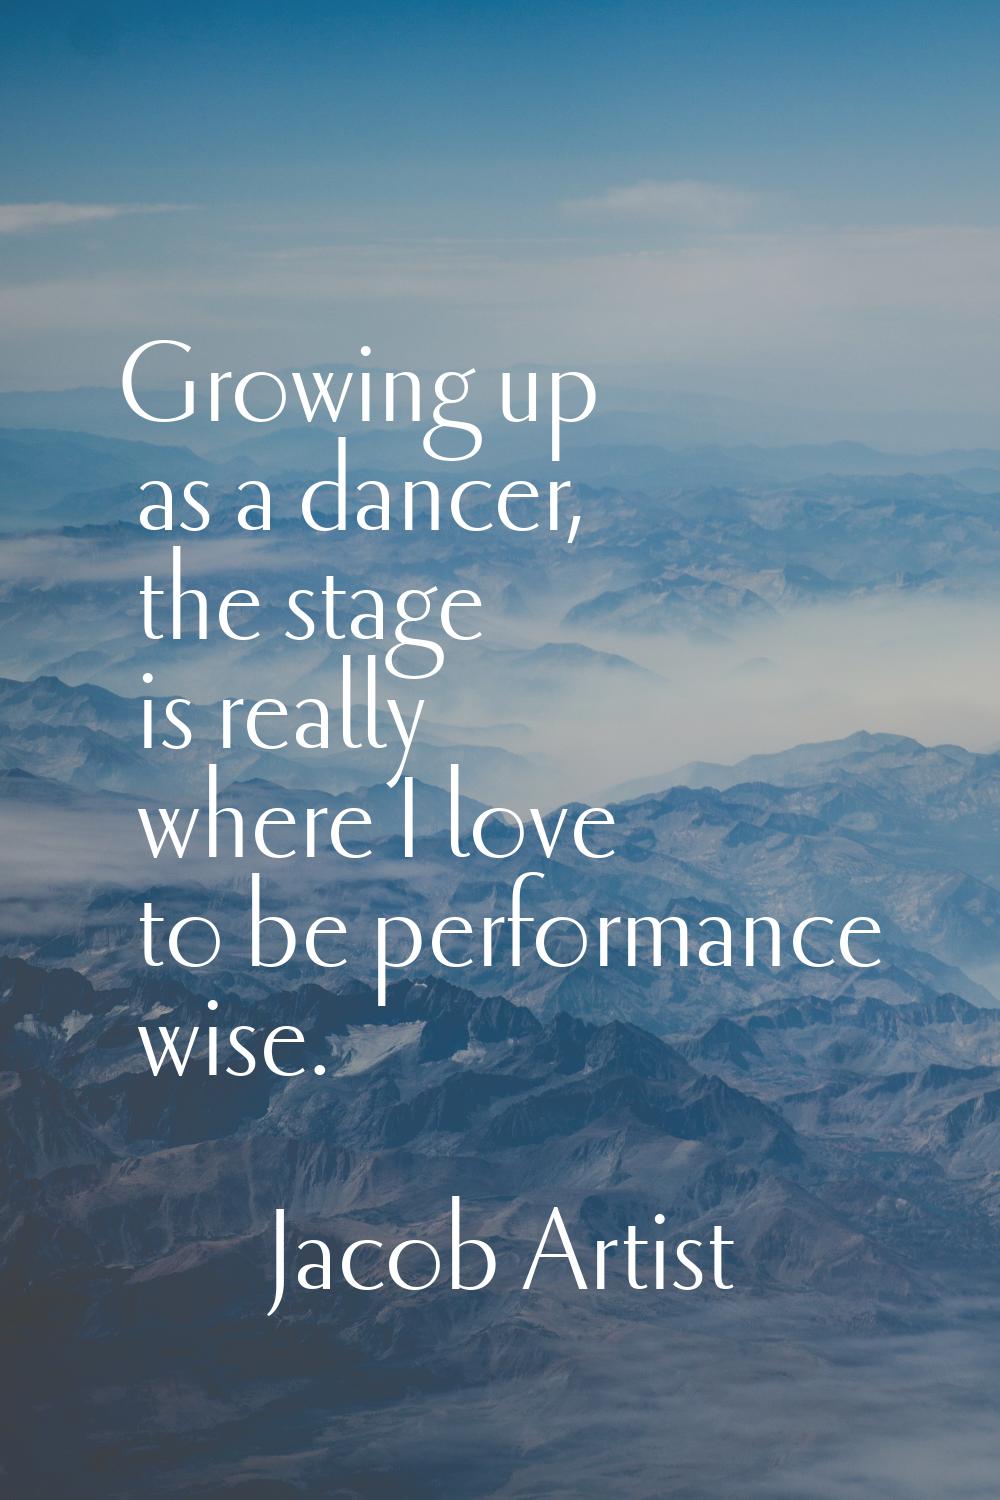 Growing up as a dancer, the stage is really where I love to be performance wise.